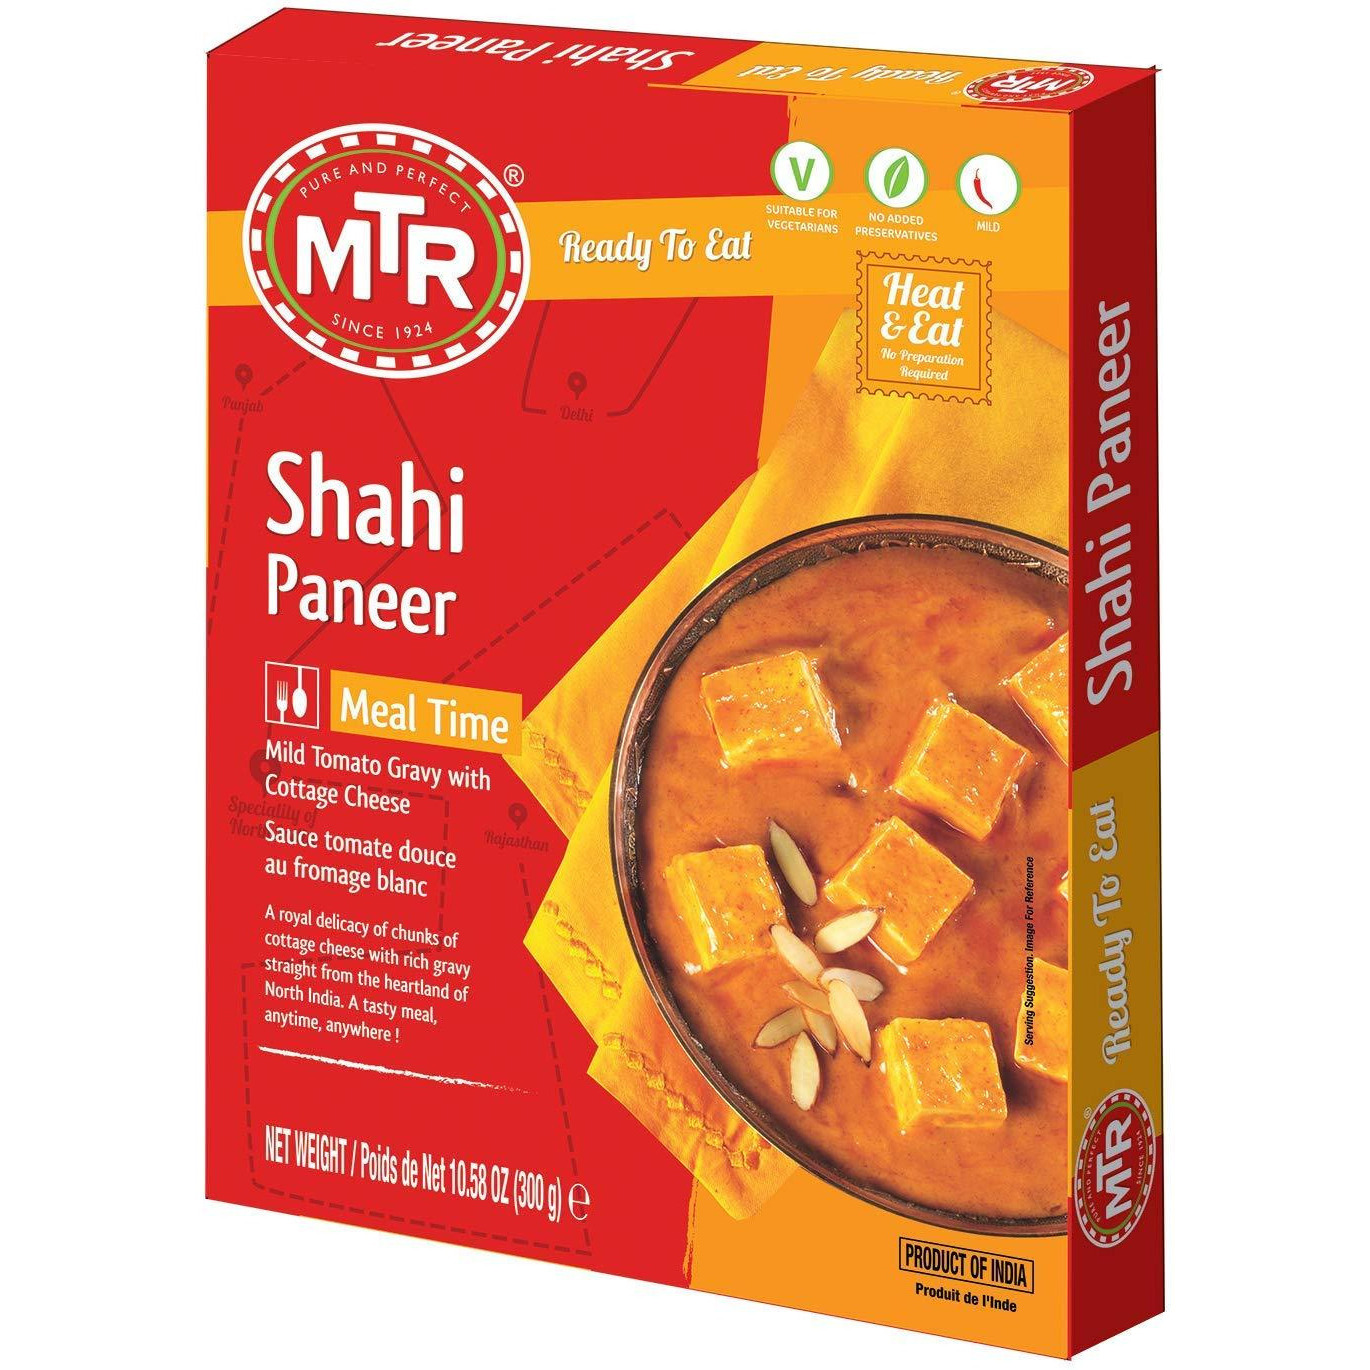 Pack of 3 - Mtr Ready To Eat Shahi Paneer - 300 Gm (10.58 Oz)